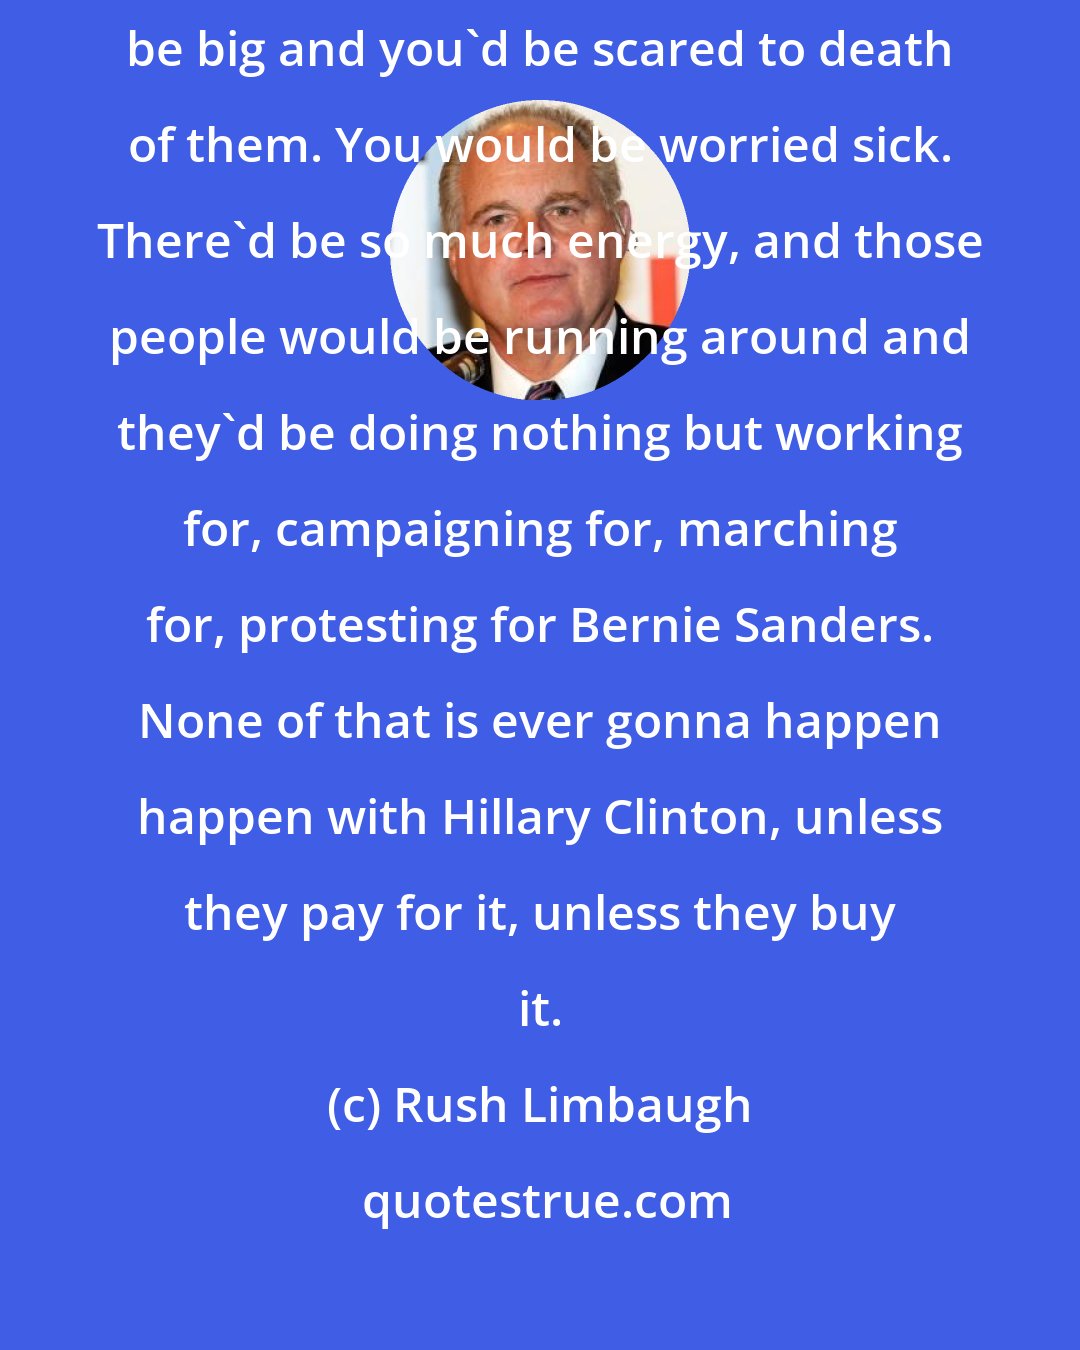 Rush Limbaugh: If Bernie Sanders was the nominee, wherever he went, the crowds would be big and you'd be scared to death of them. You would be worried sick. There'd be so much energy, and those people would be running around and they'd be doing nothing but working for, campaigning for, marching for, protesting for Bernie Sanders. None of that is ever gonna happen happen with Hillary Clinton, unless they pay for it, unless they buy it.